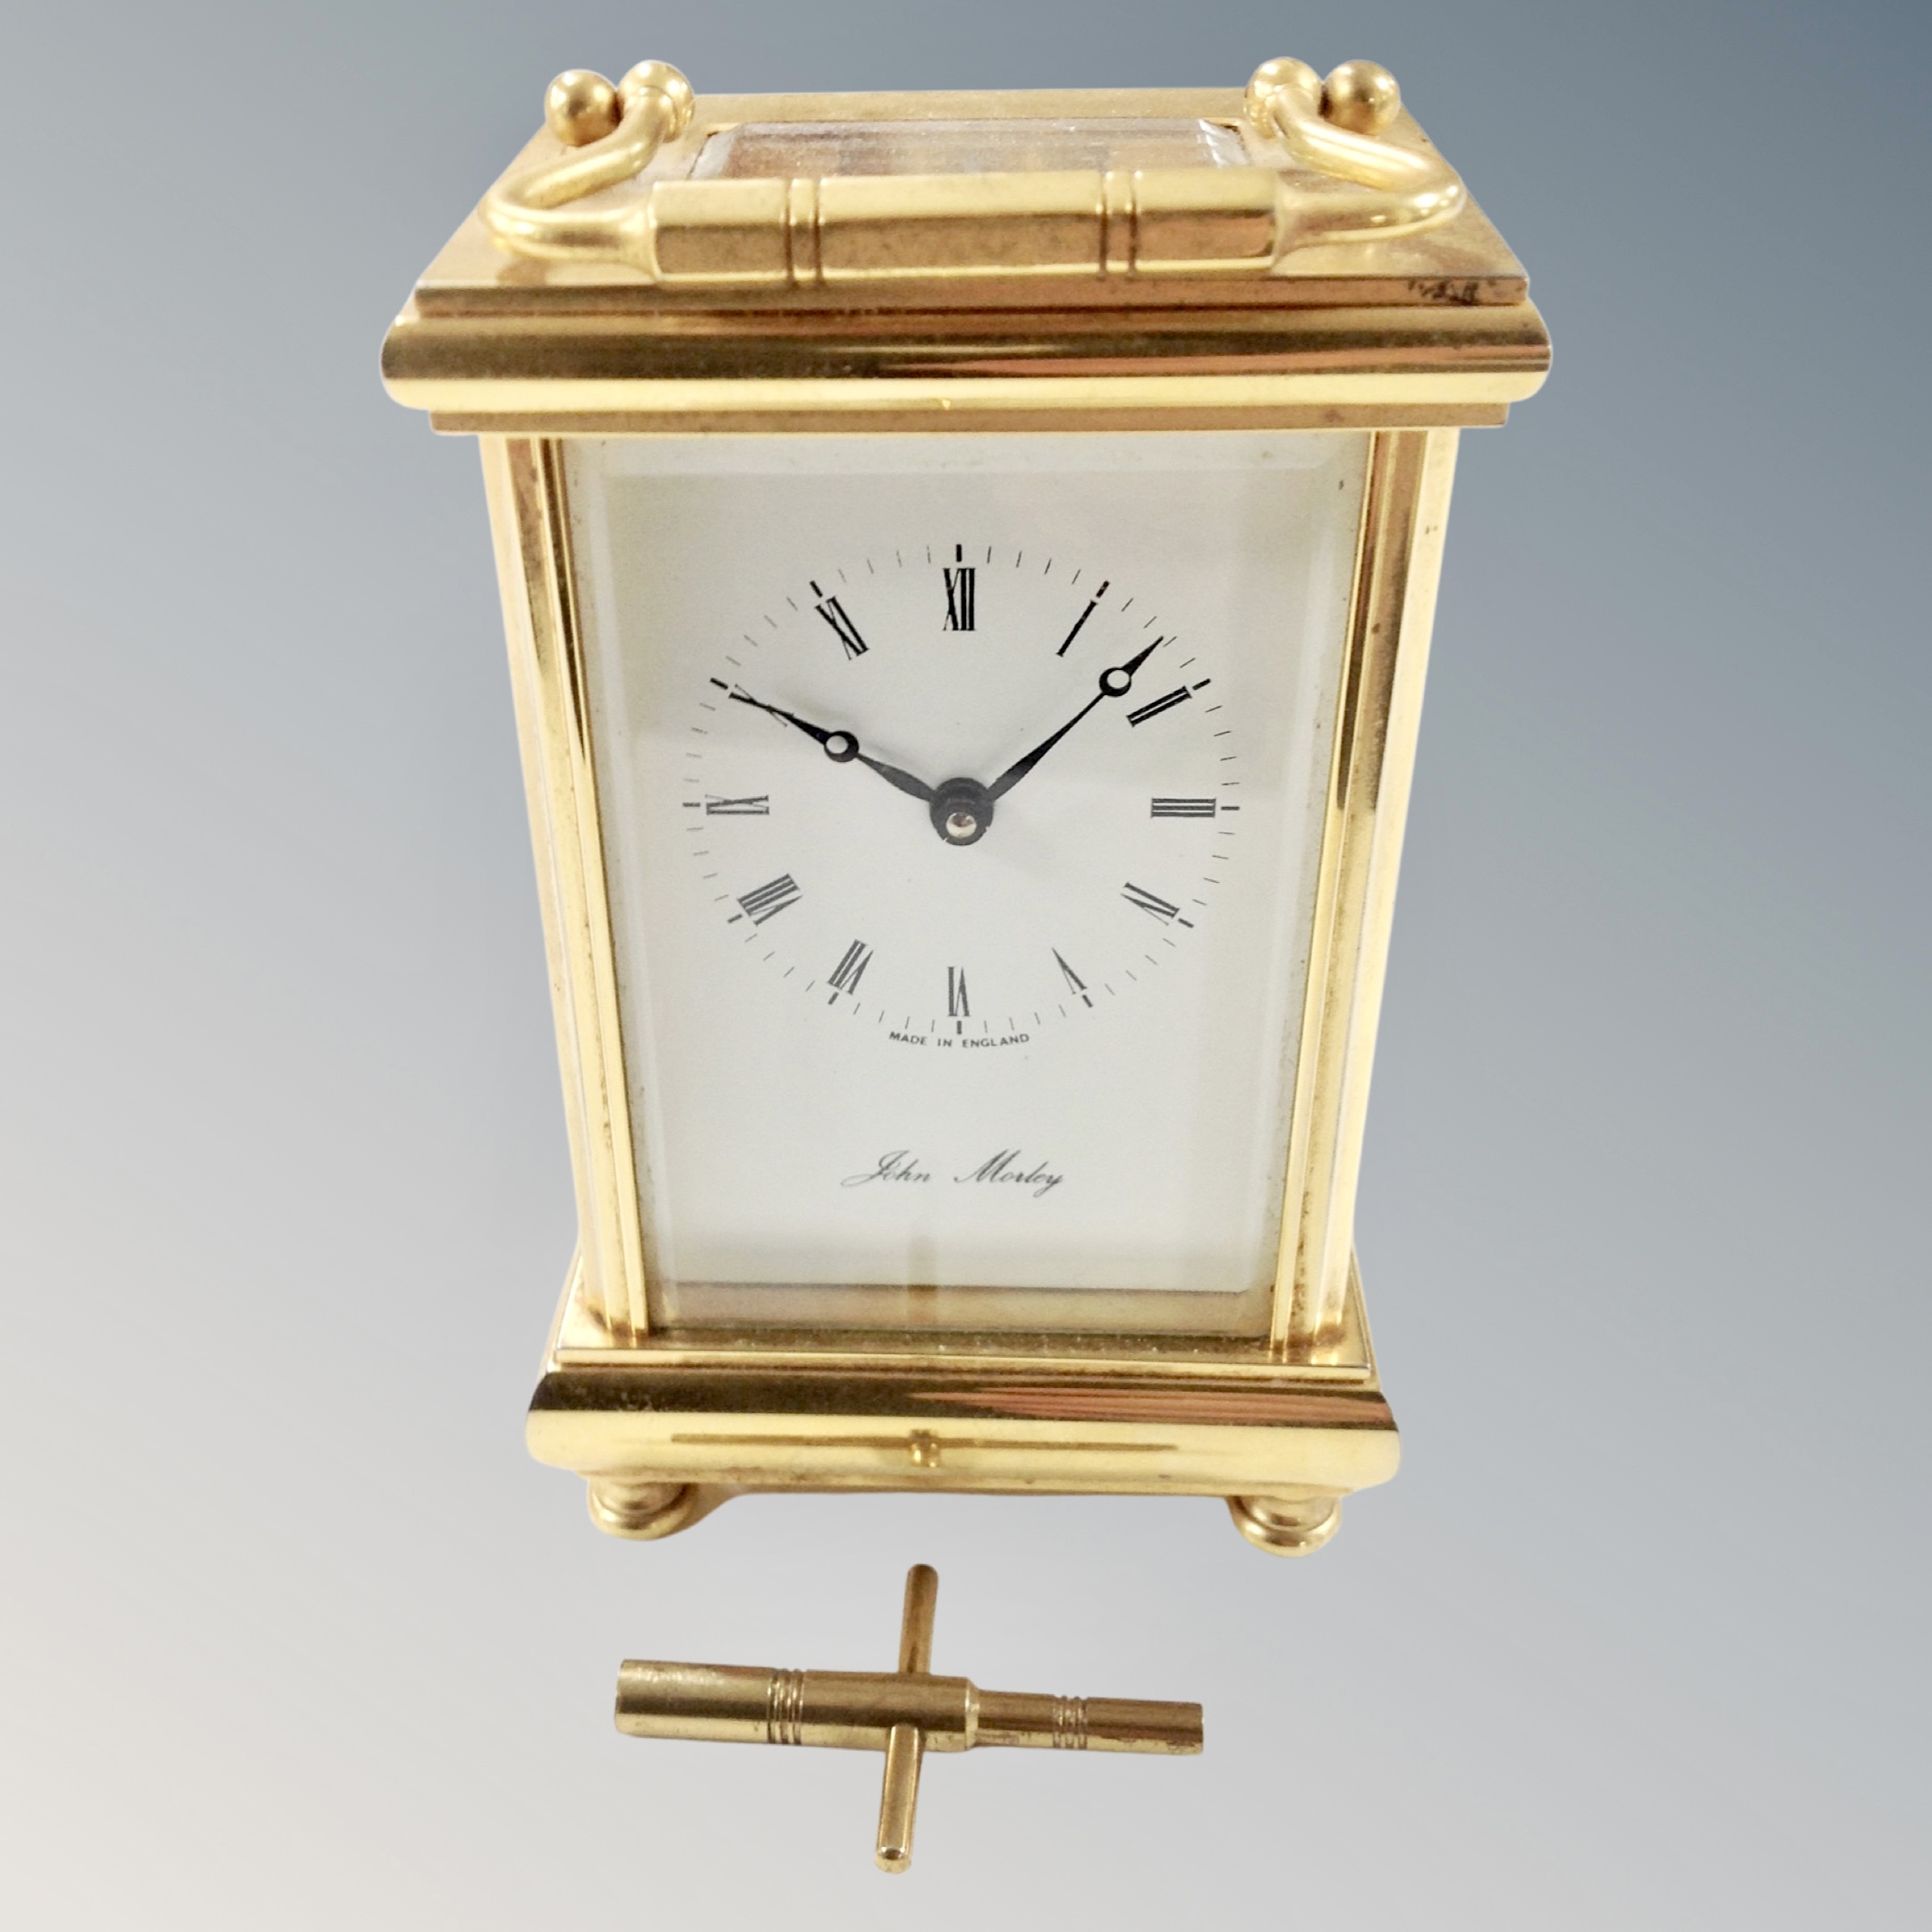 A brass eleven jewel carriage clock with key